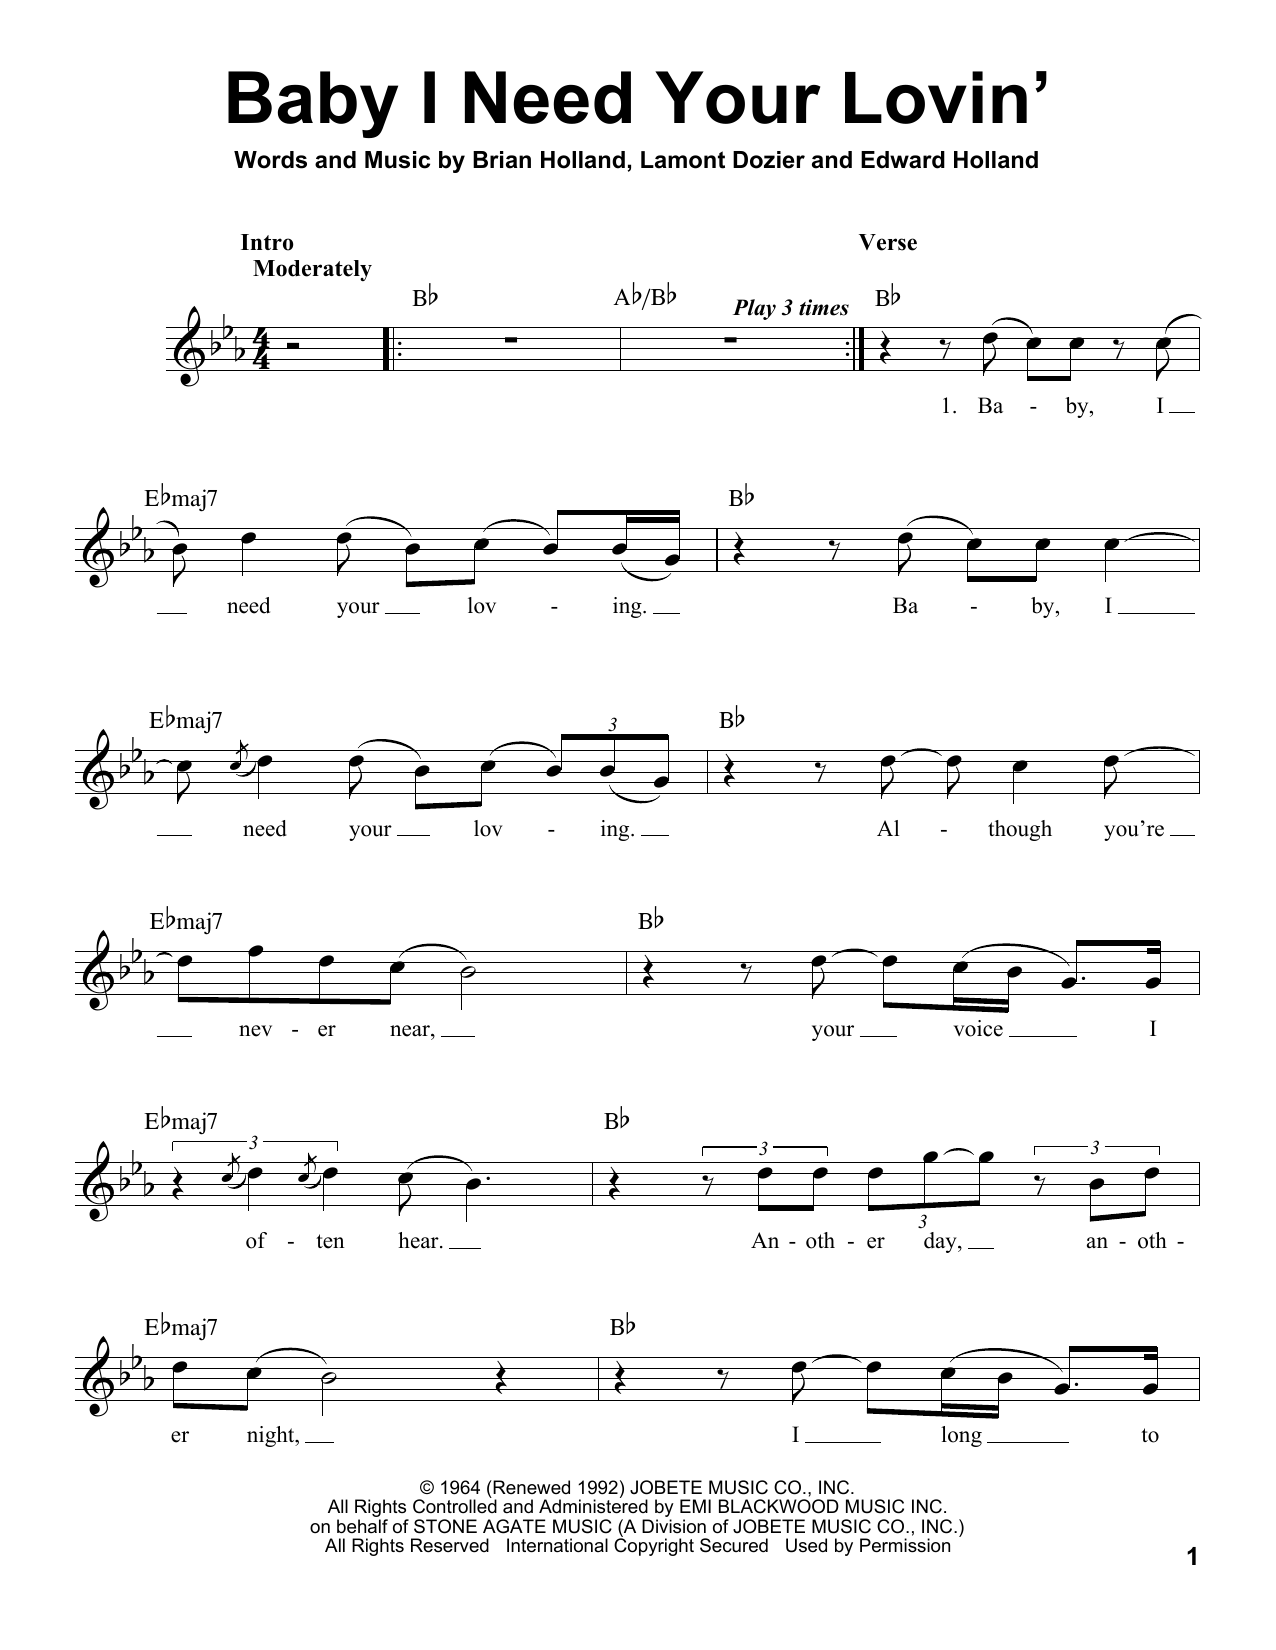 Download The Four Tops Baby I Need Your Lovin' Sheet Music